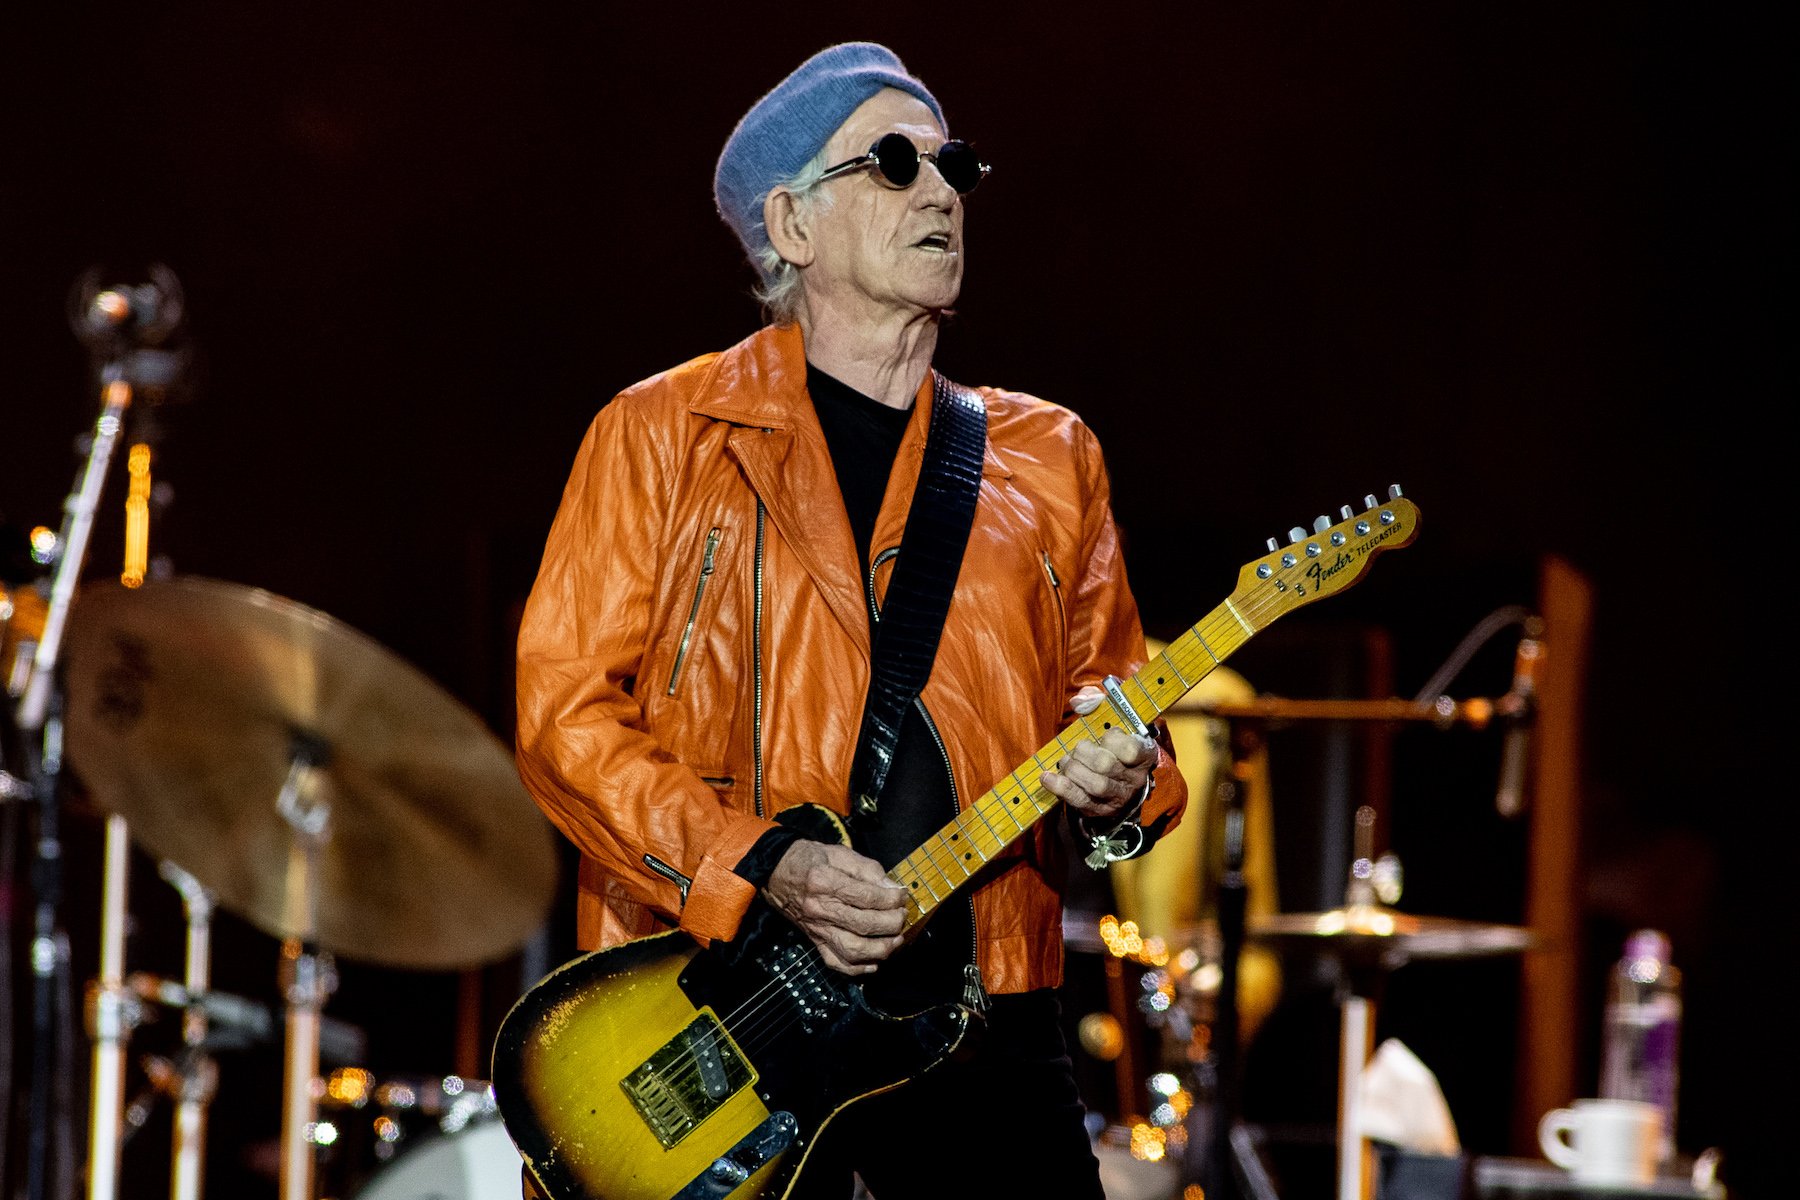 Keith Richards, who once helped Jimi Hendrix get his career off the ground, performing wearing an orange jacket in 2022